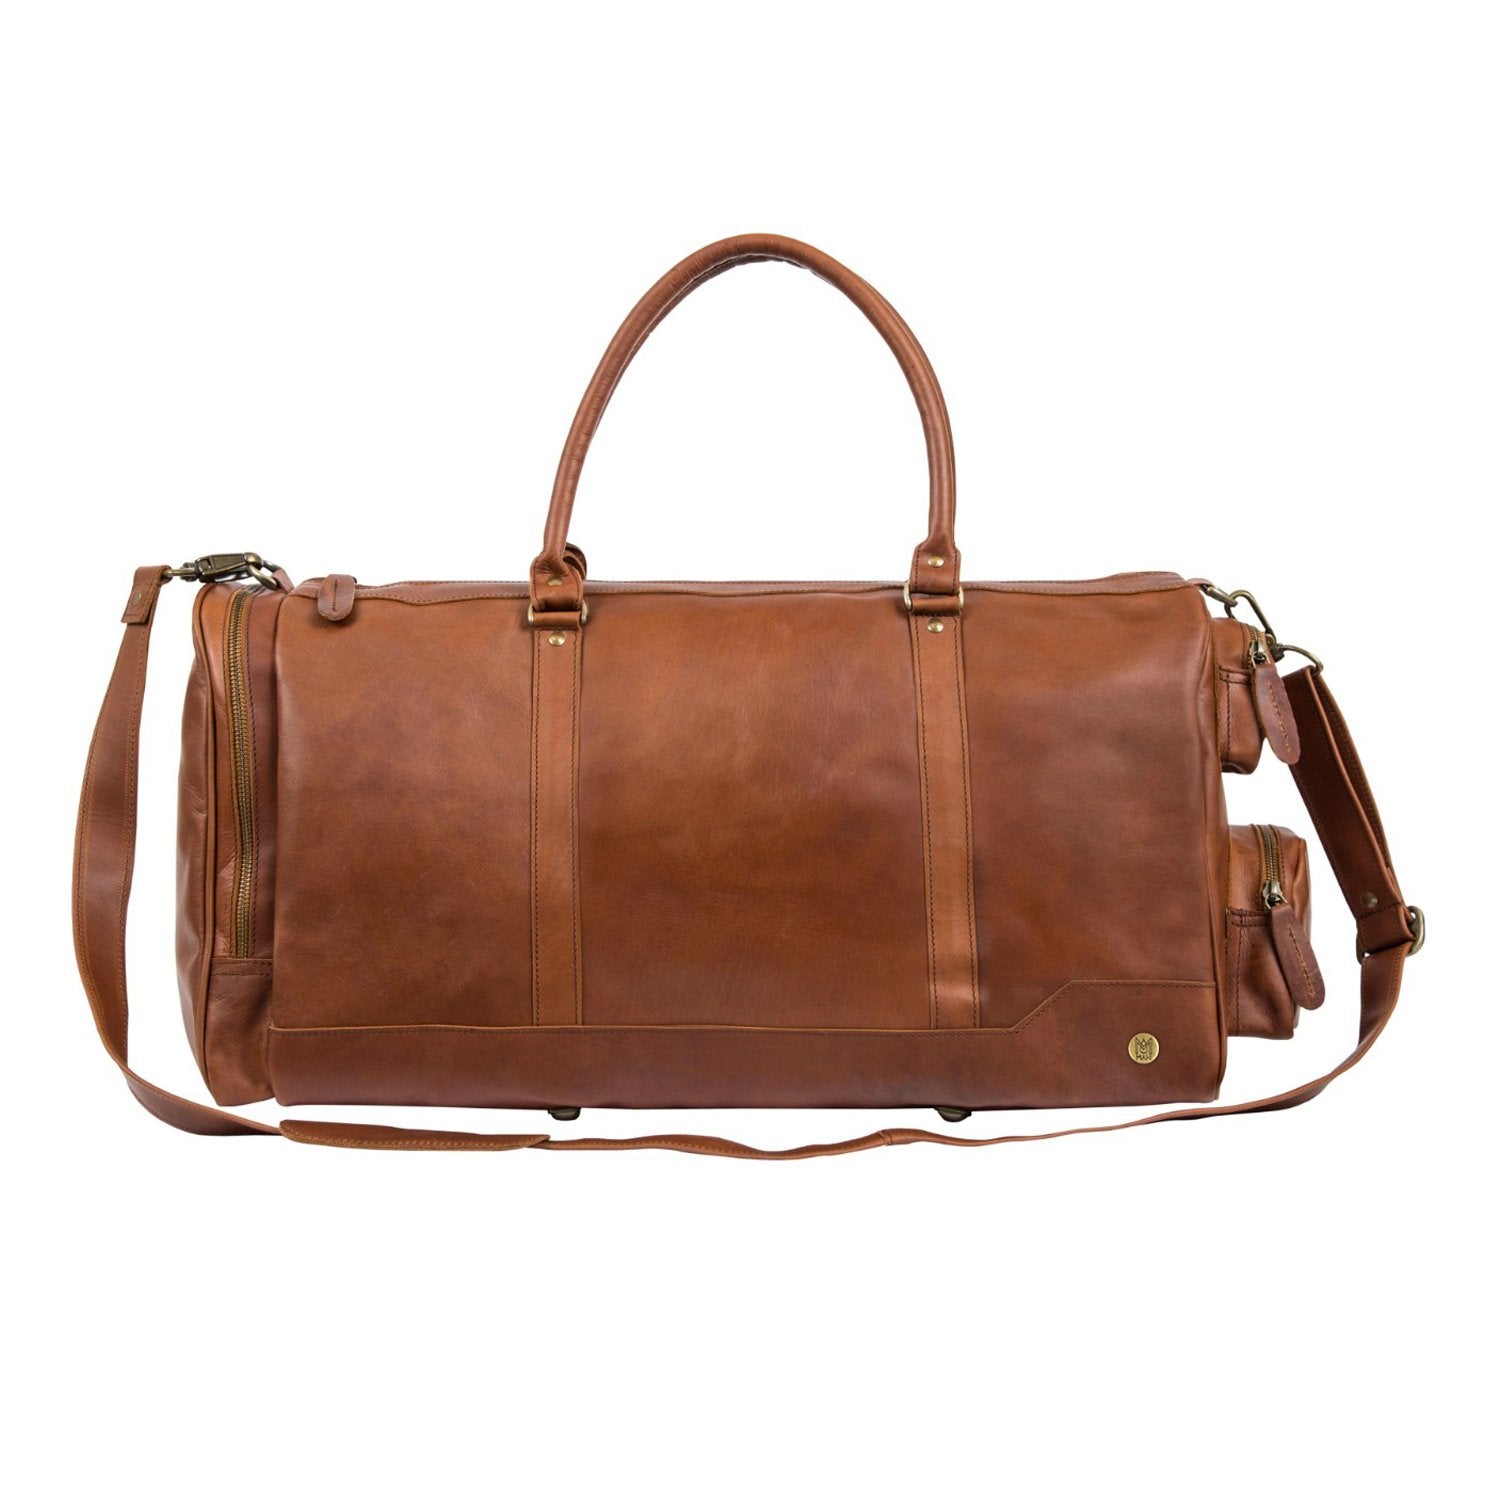 Brown Leather Bag OPELLE Large Ballet Bag in Mahogany LAST